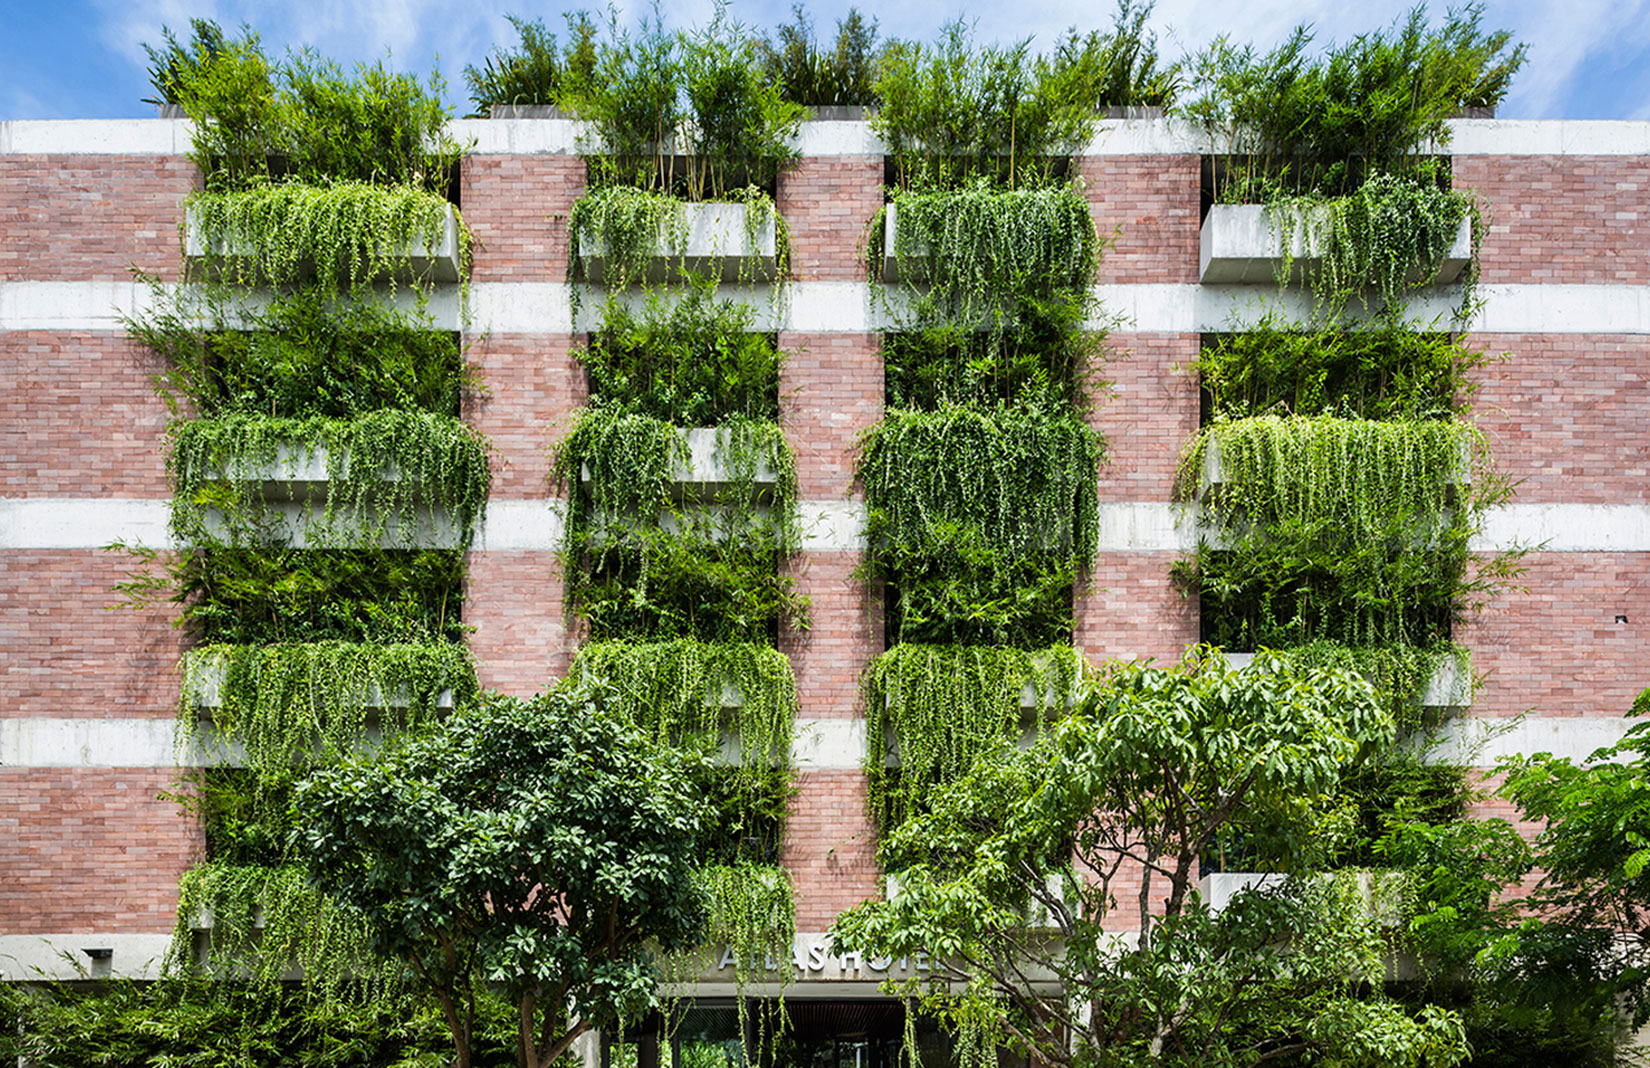 How Vietnam's architects are embracing biophilic design